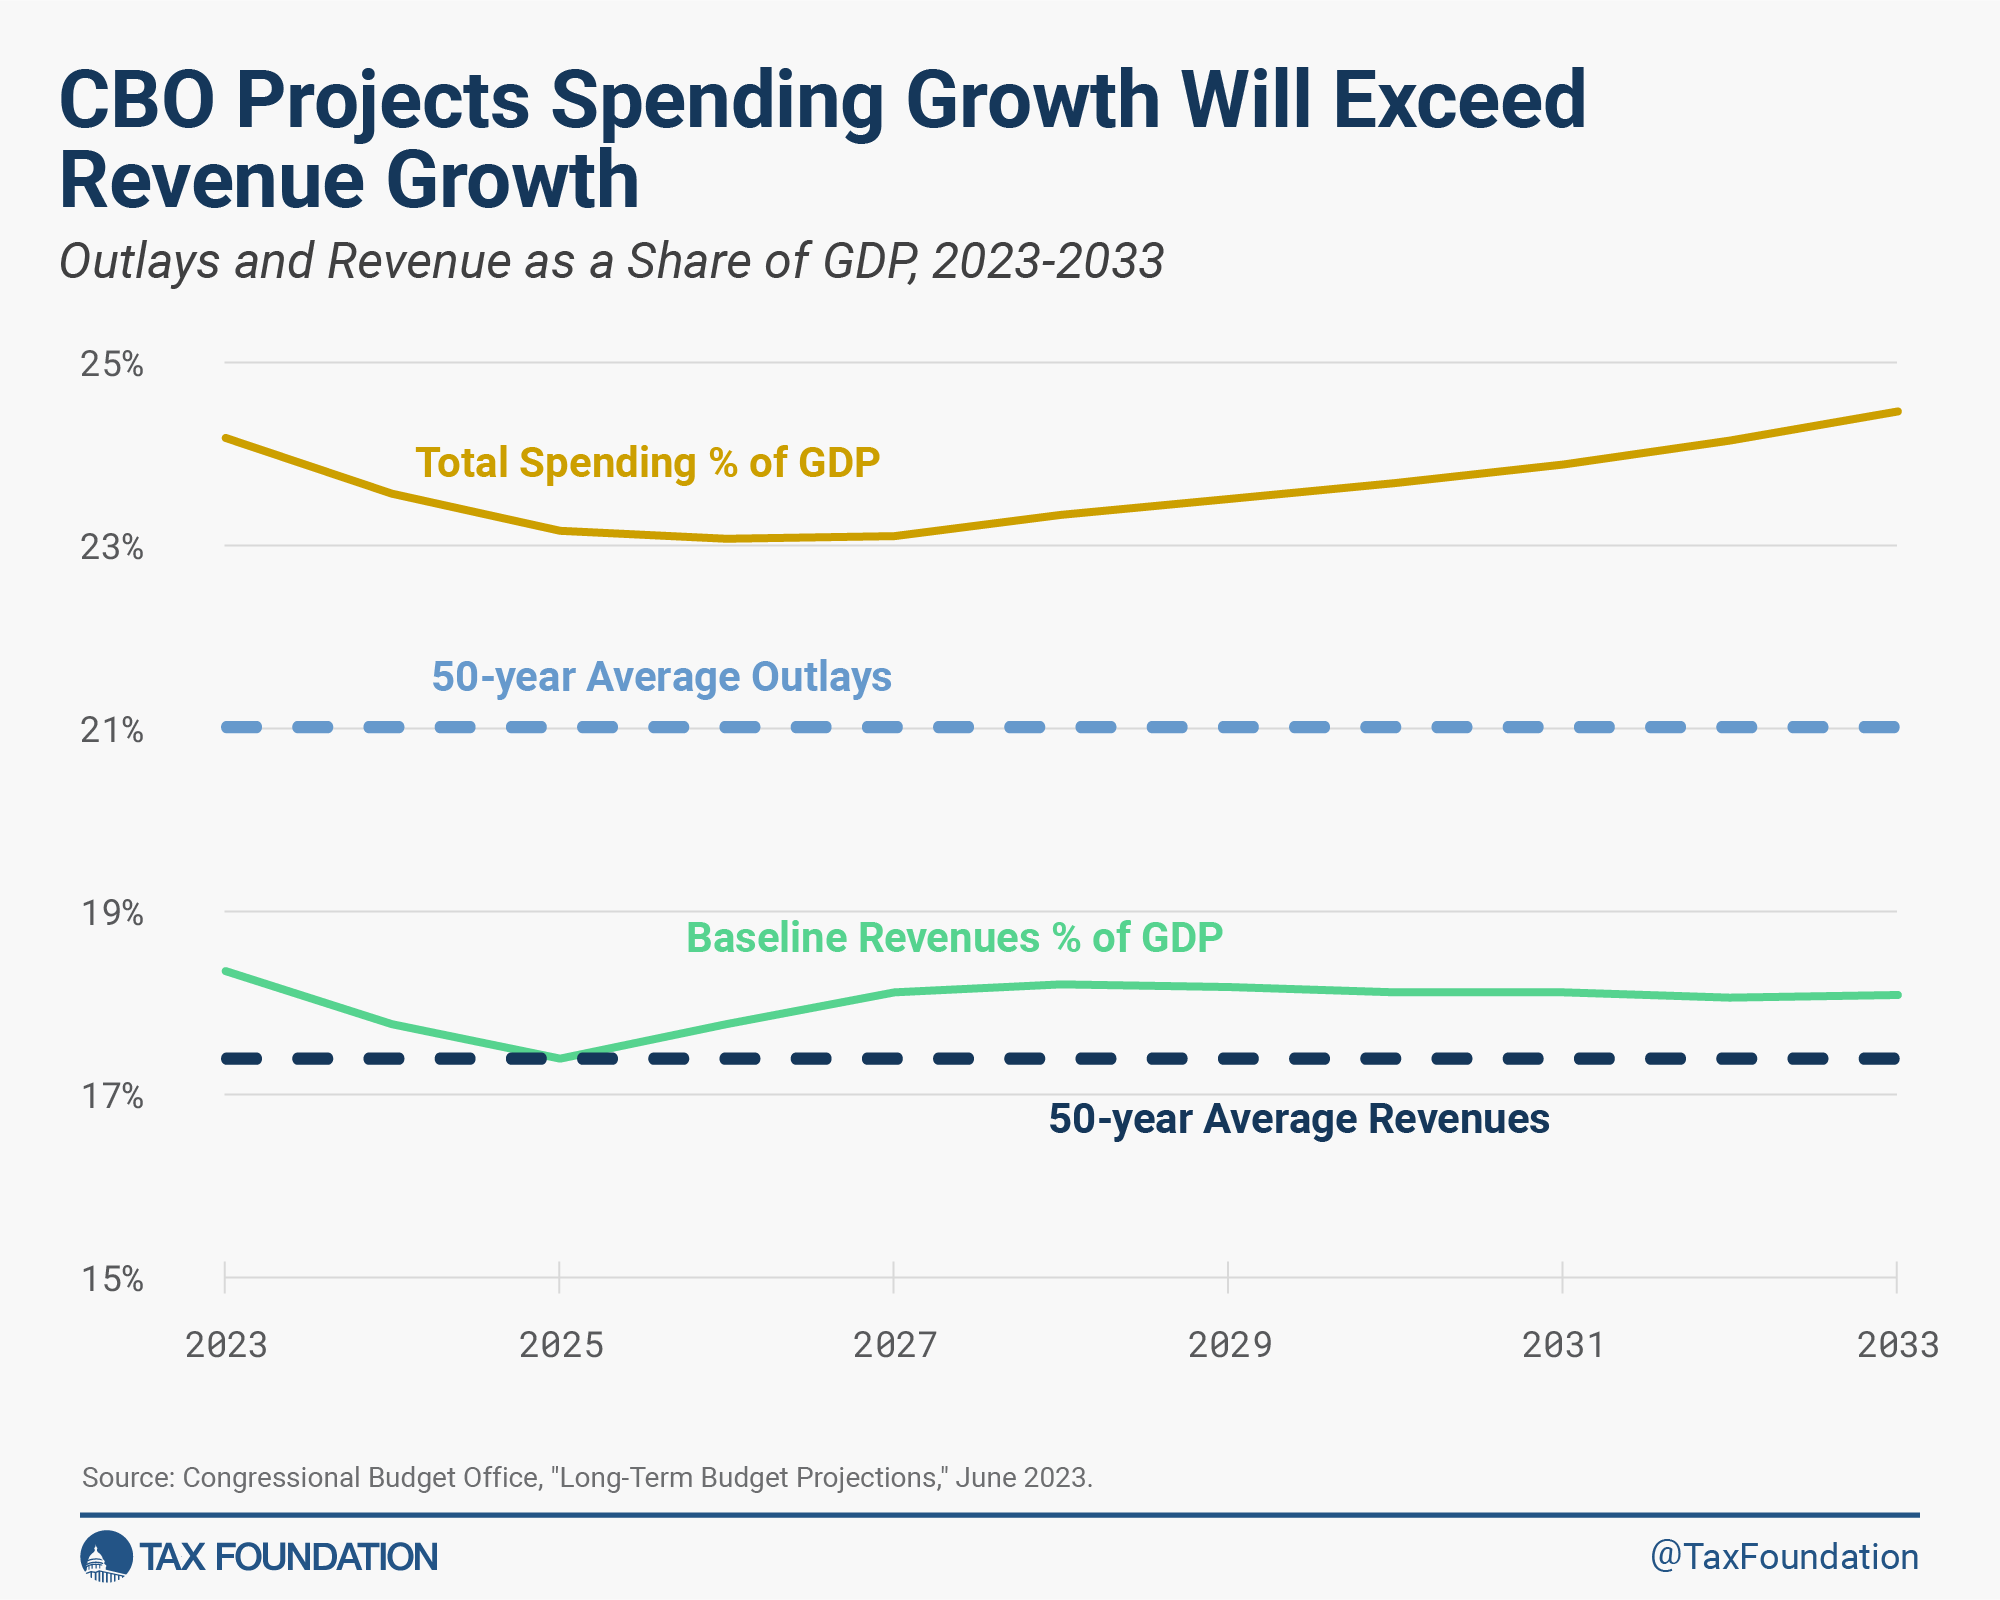 CBO projects US spending growth will exceed revenue growth in 2023